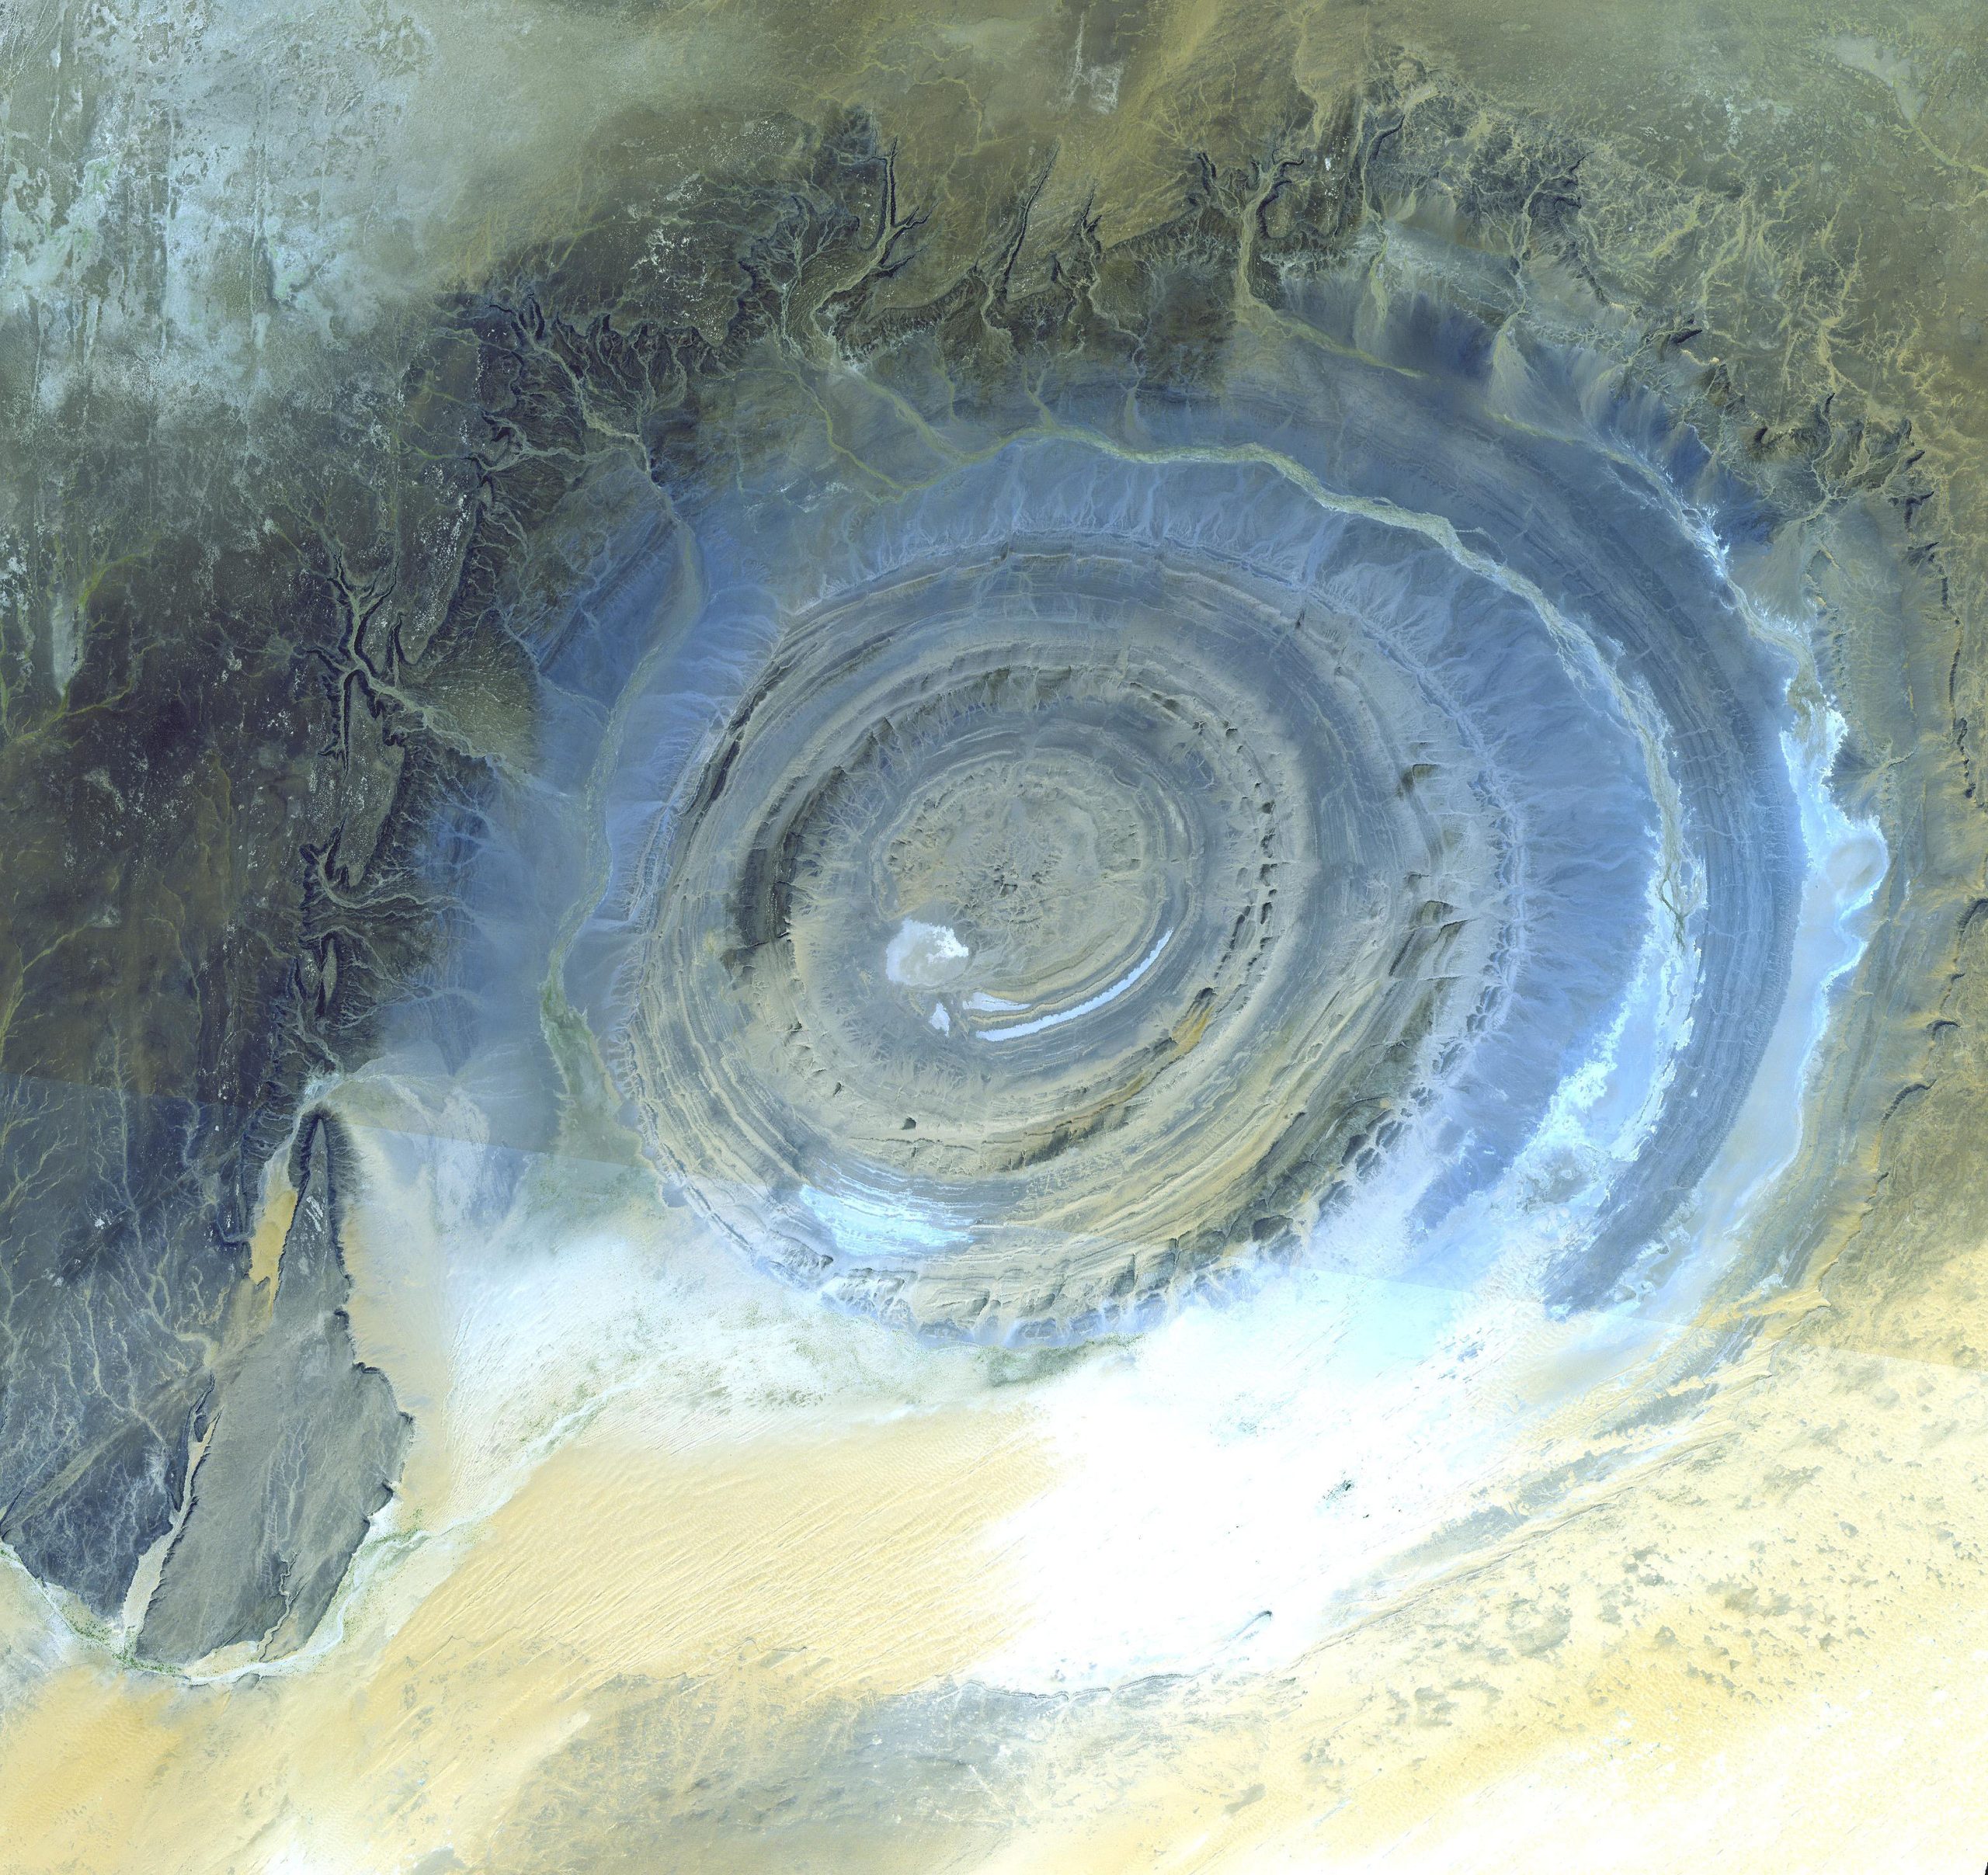 View of a dome from space. The photo shows upwarped beds of rock, where the center of the dome has been eroded away.